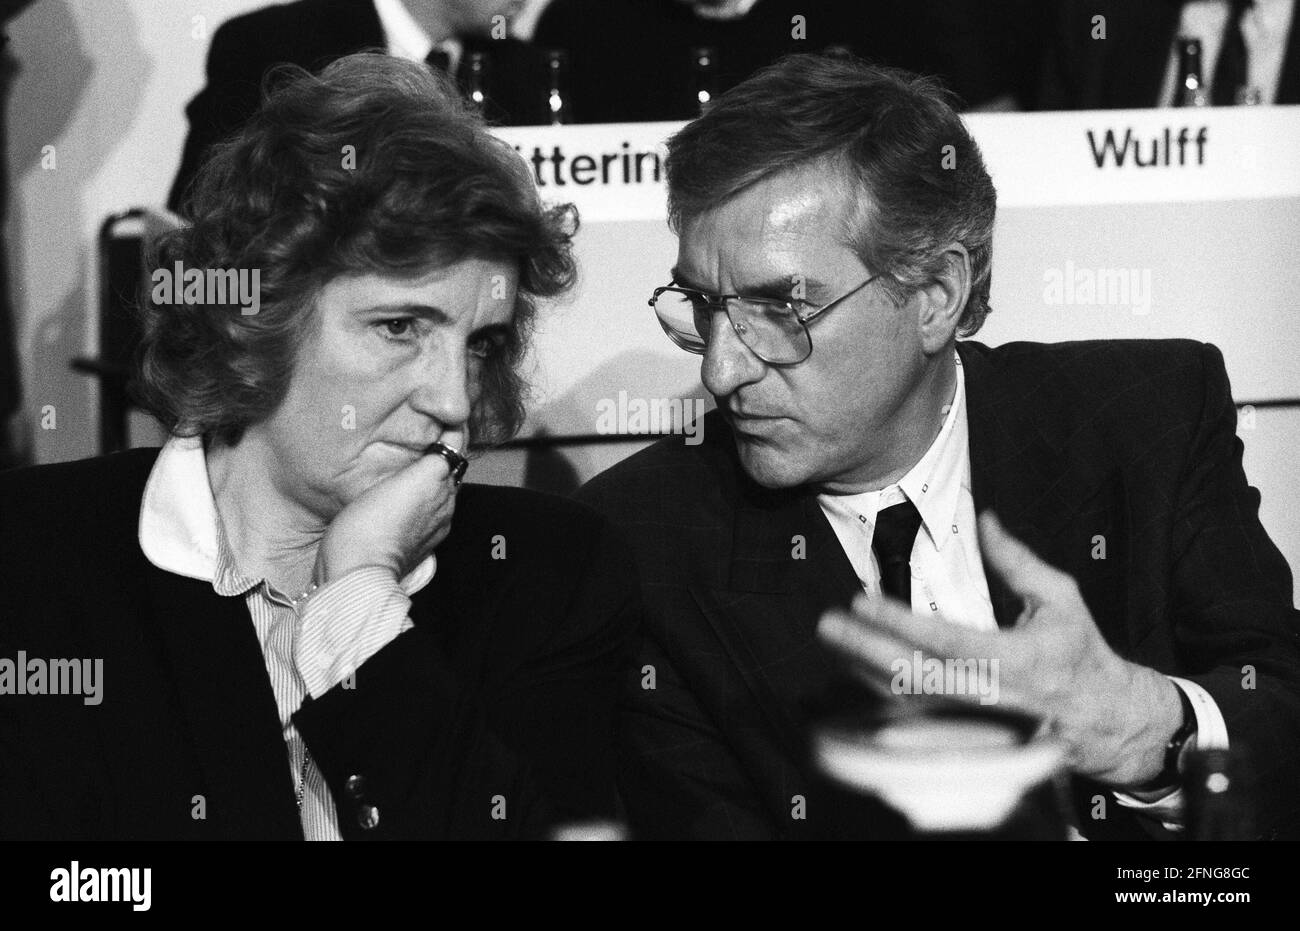 Germany, Hanover, 13.10.1989. Archive No: 09-57-09 CDU state party conference-Lower Saxony Photo: Josef Stock, Minister of the Interior-Lower Saxony and Birgit Breuel, Lower Saxony Minister of Finance [automated translation] Stock Photo